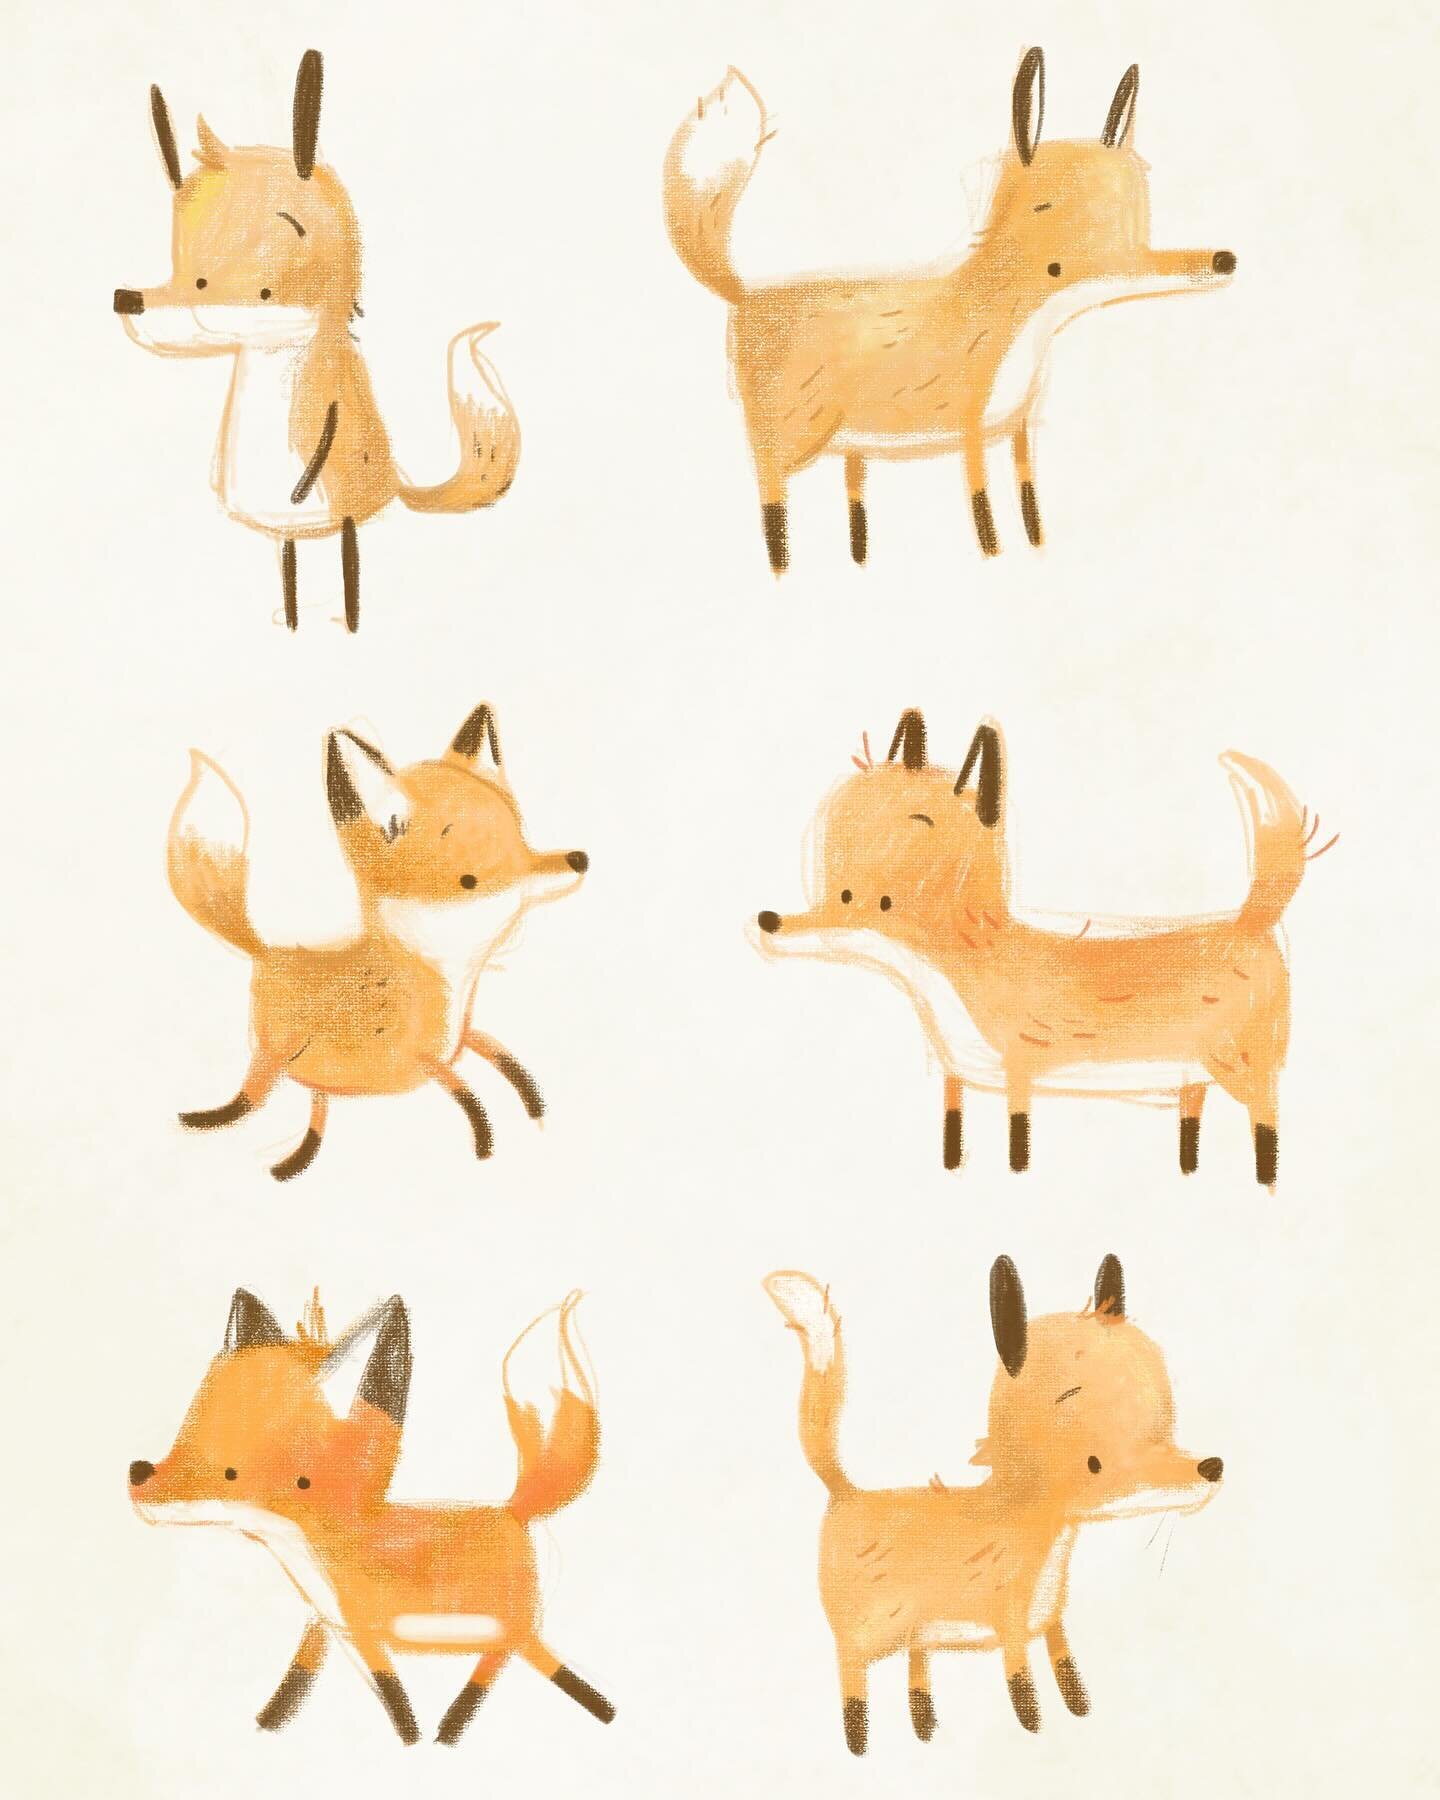 A page of digital foxes: 68-73 for #100daydrawing2023 created in Fresco @adobe. The thing I&rsquo;ve learned the most so far is to simply not care anymore how each fox turns out but to just explore options. Some I like. Some I don&rsquo;t. It&rsquo;s